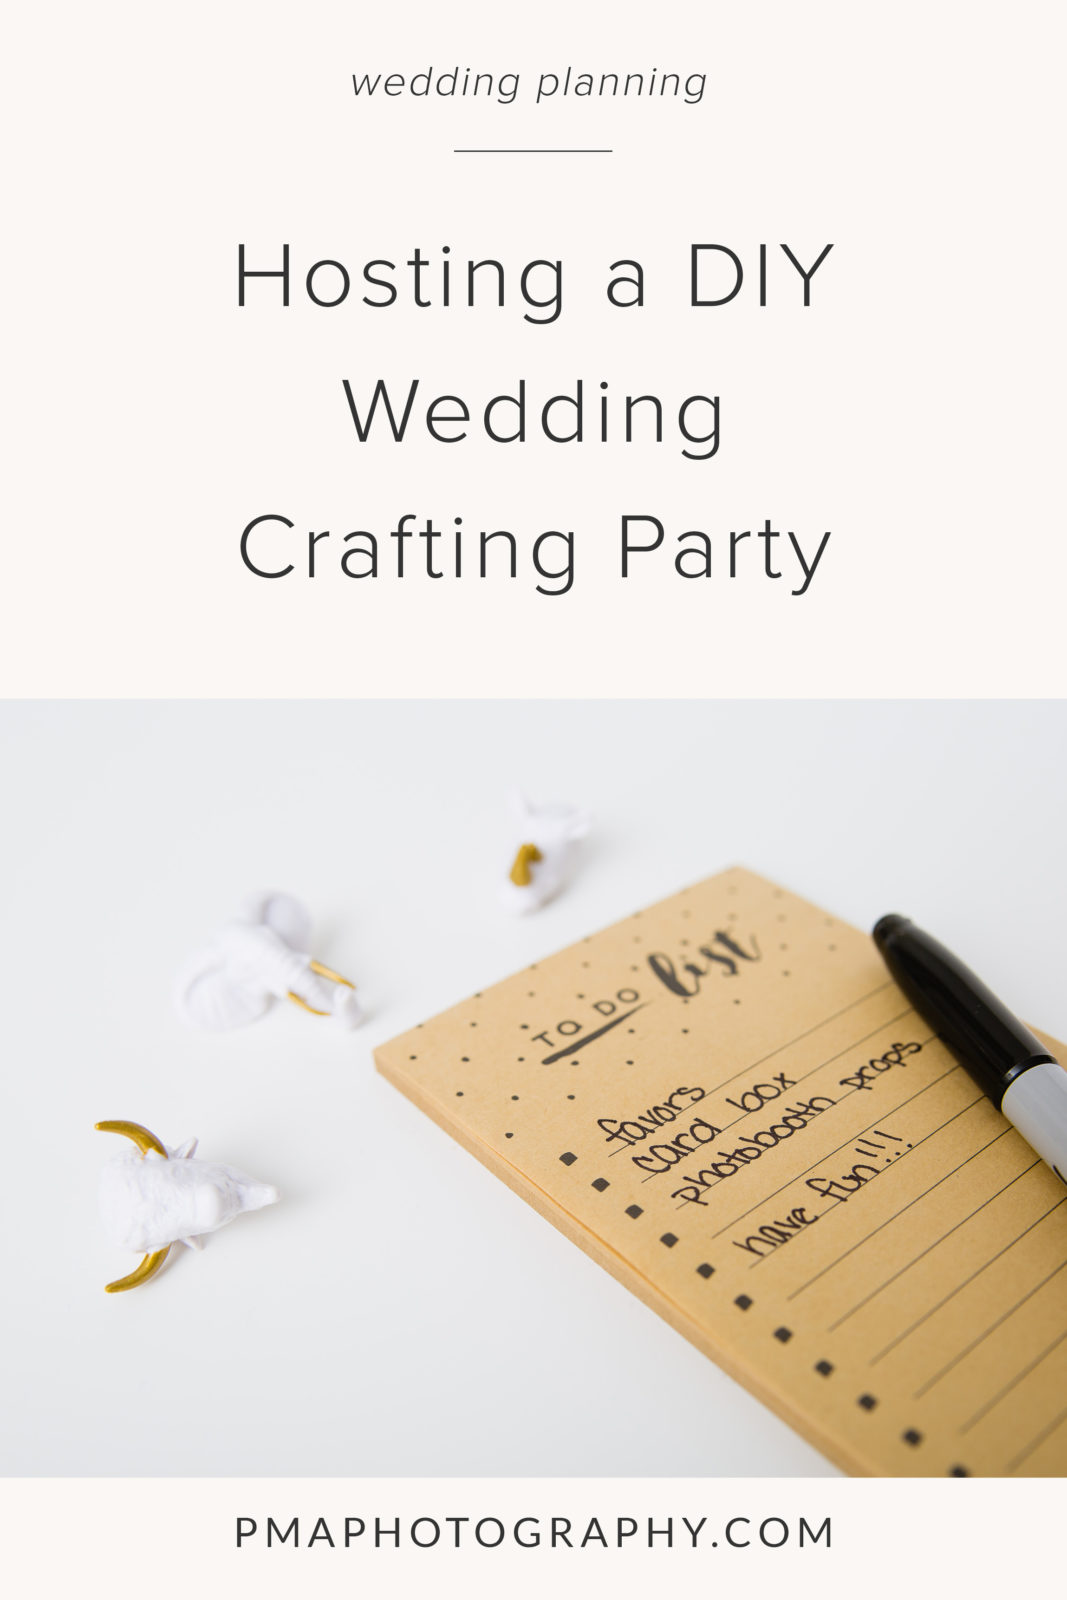 Hosting a DIY wedding crafting party by Amber of PMA Photography.